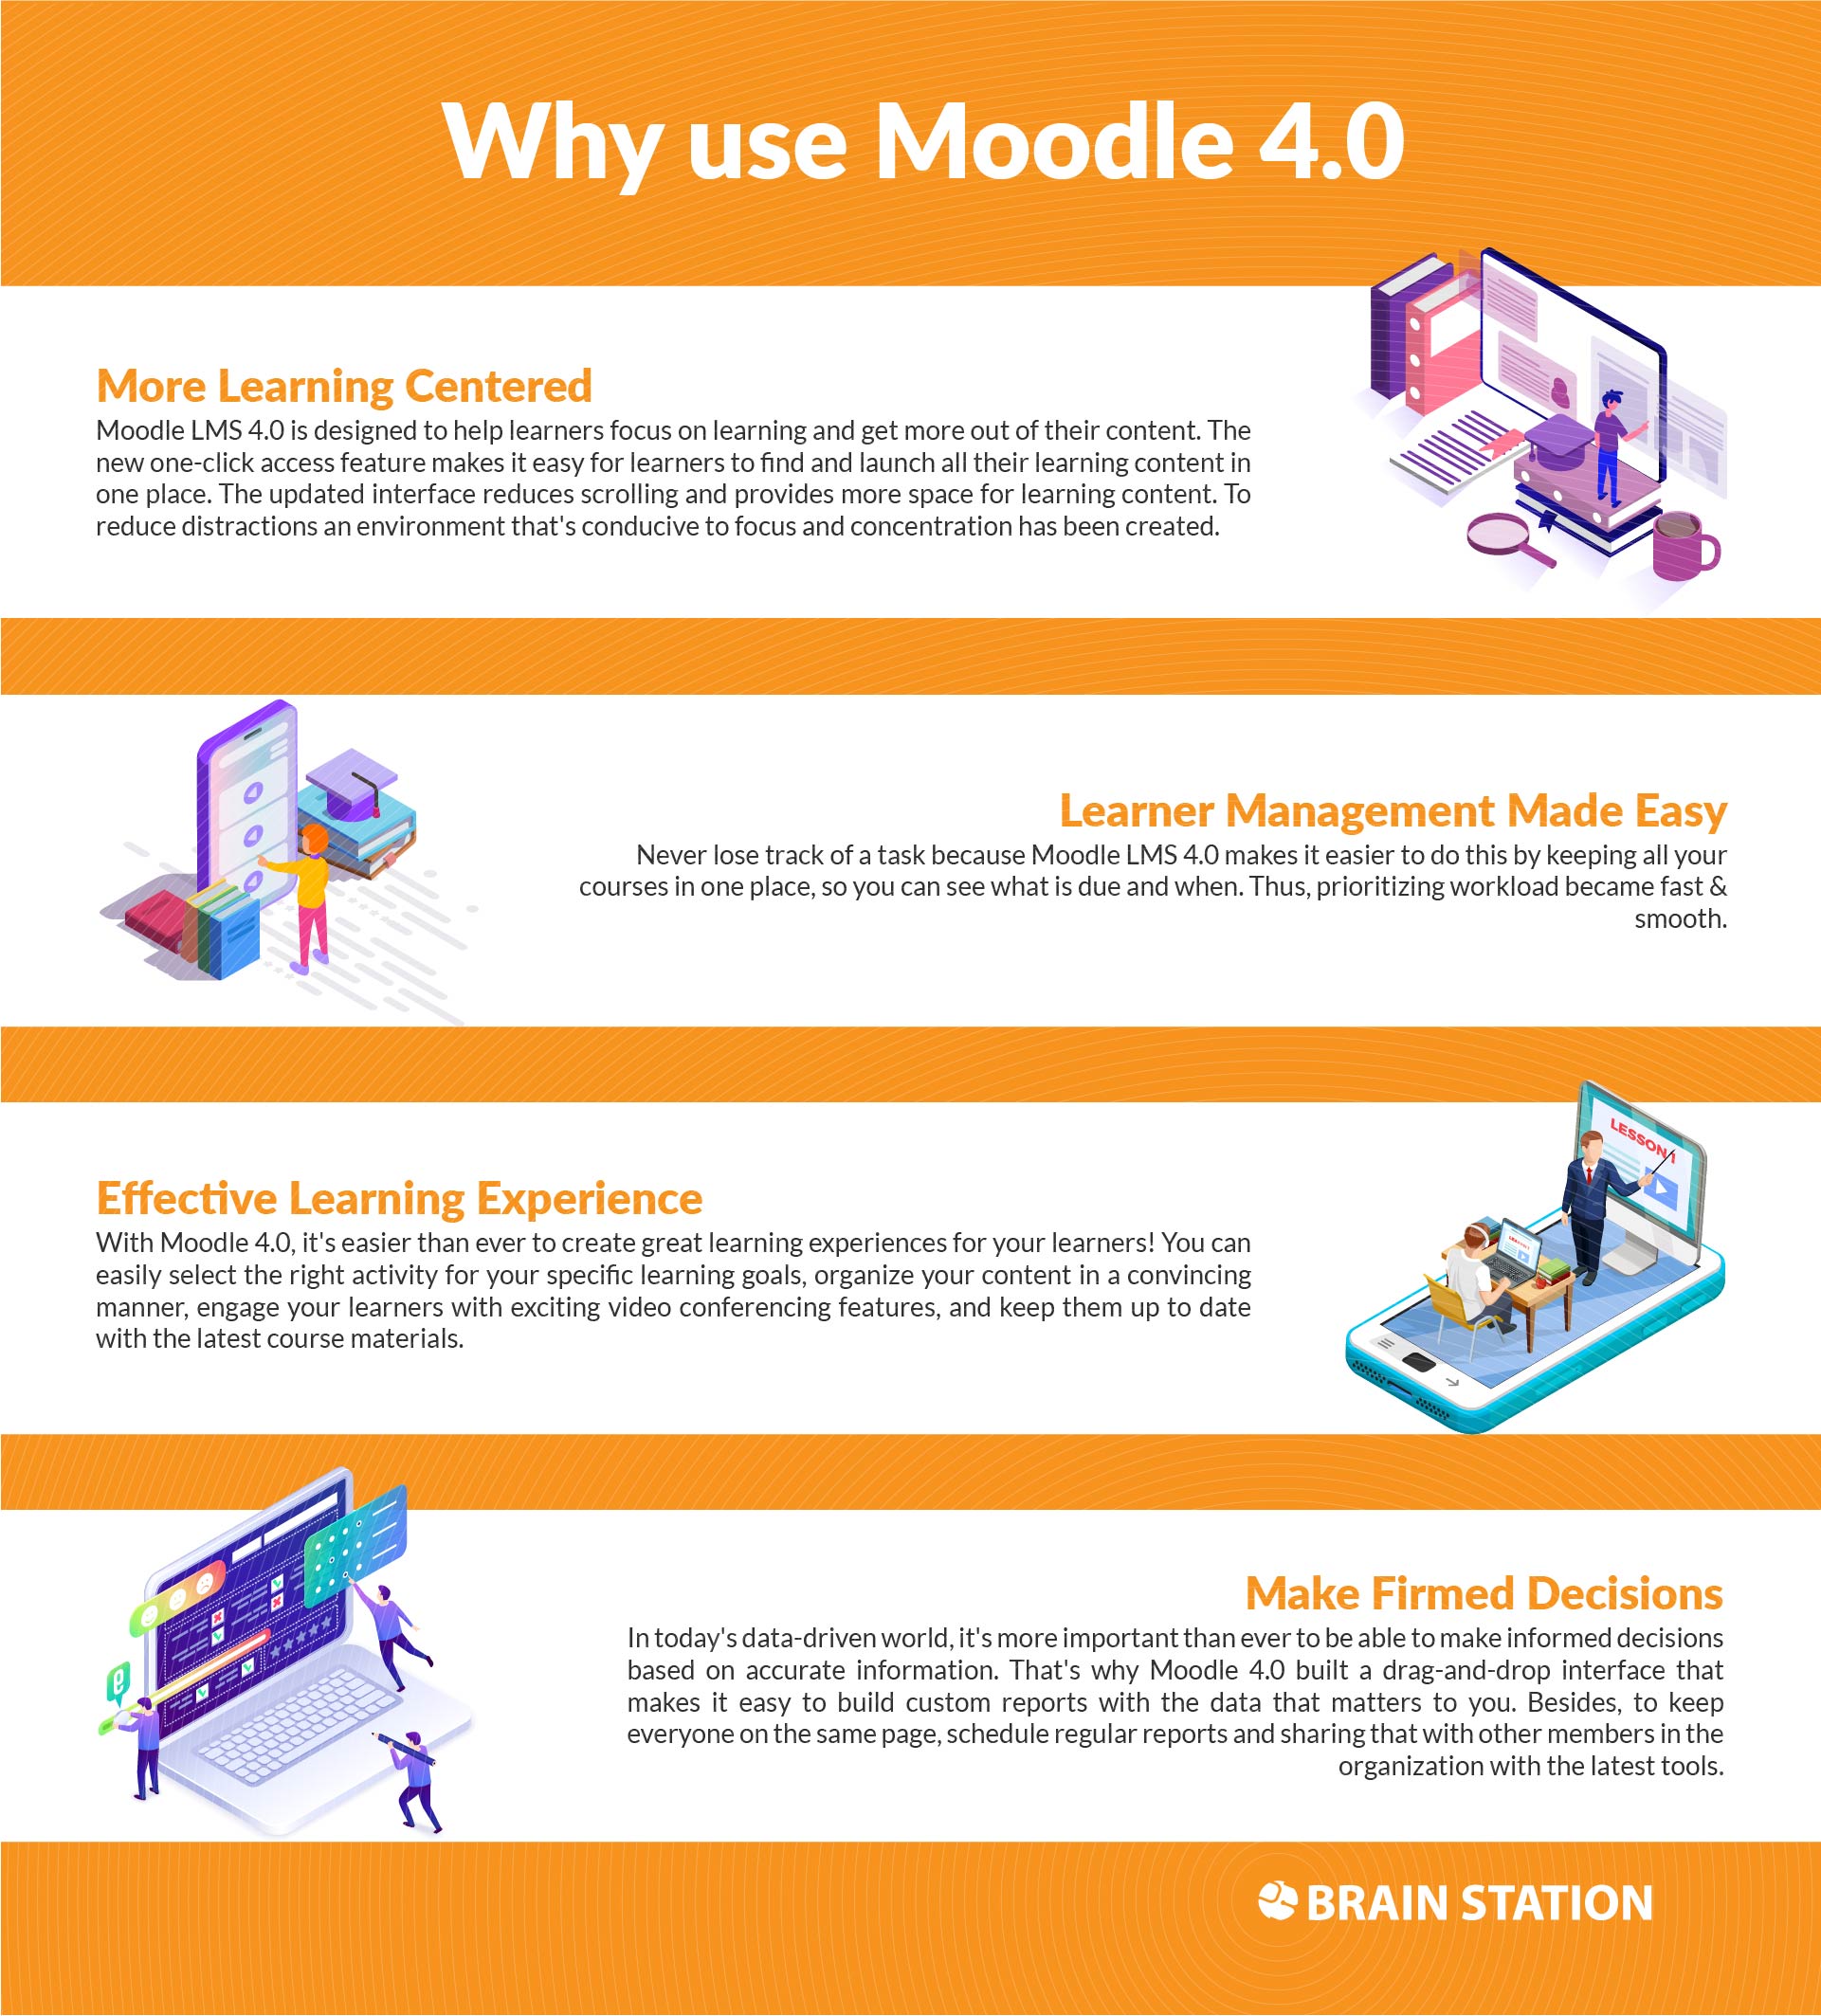 Improve Your Lms Experience With Moodle 40 Brain Station 51